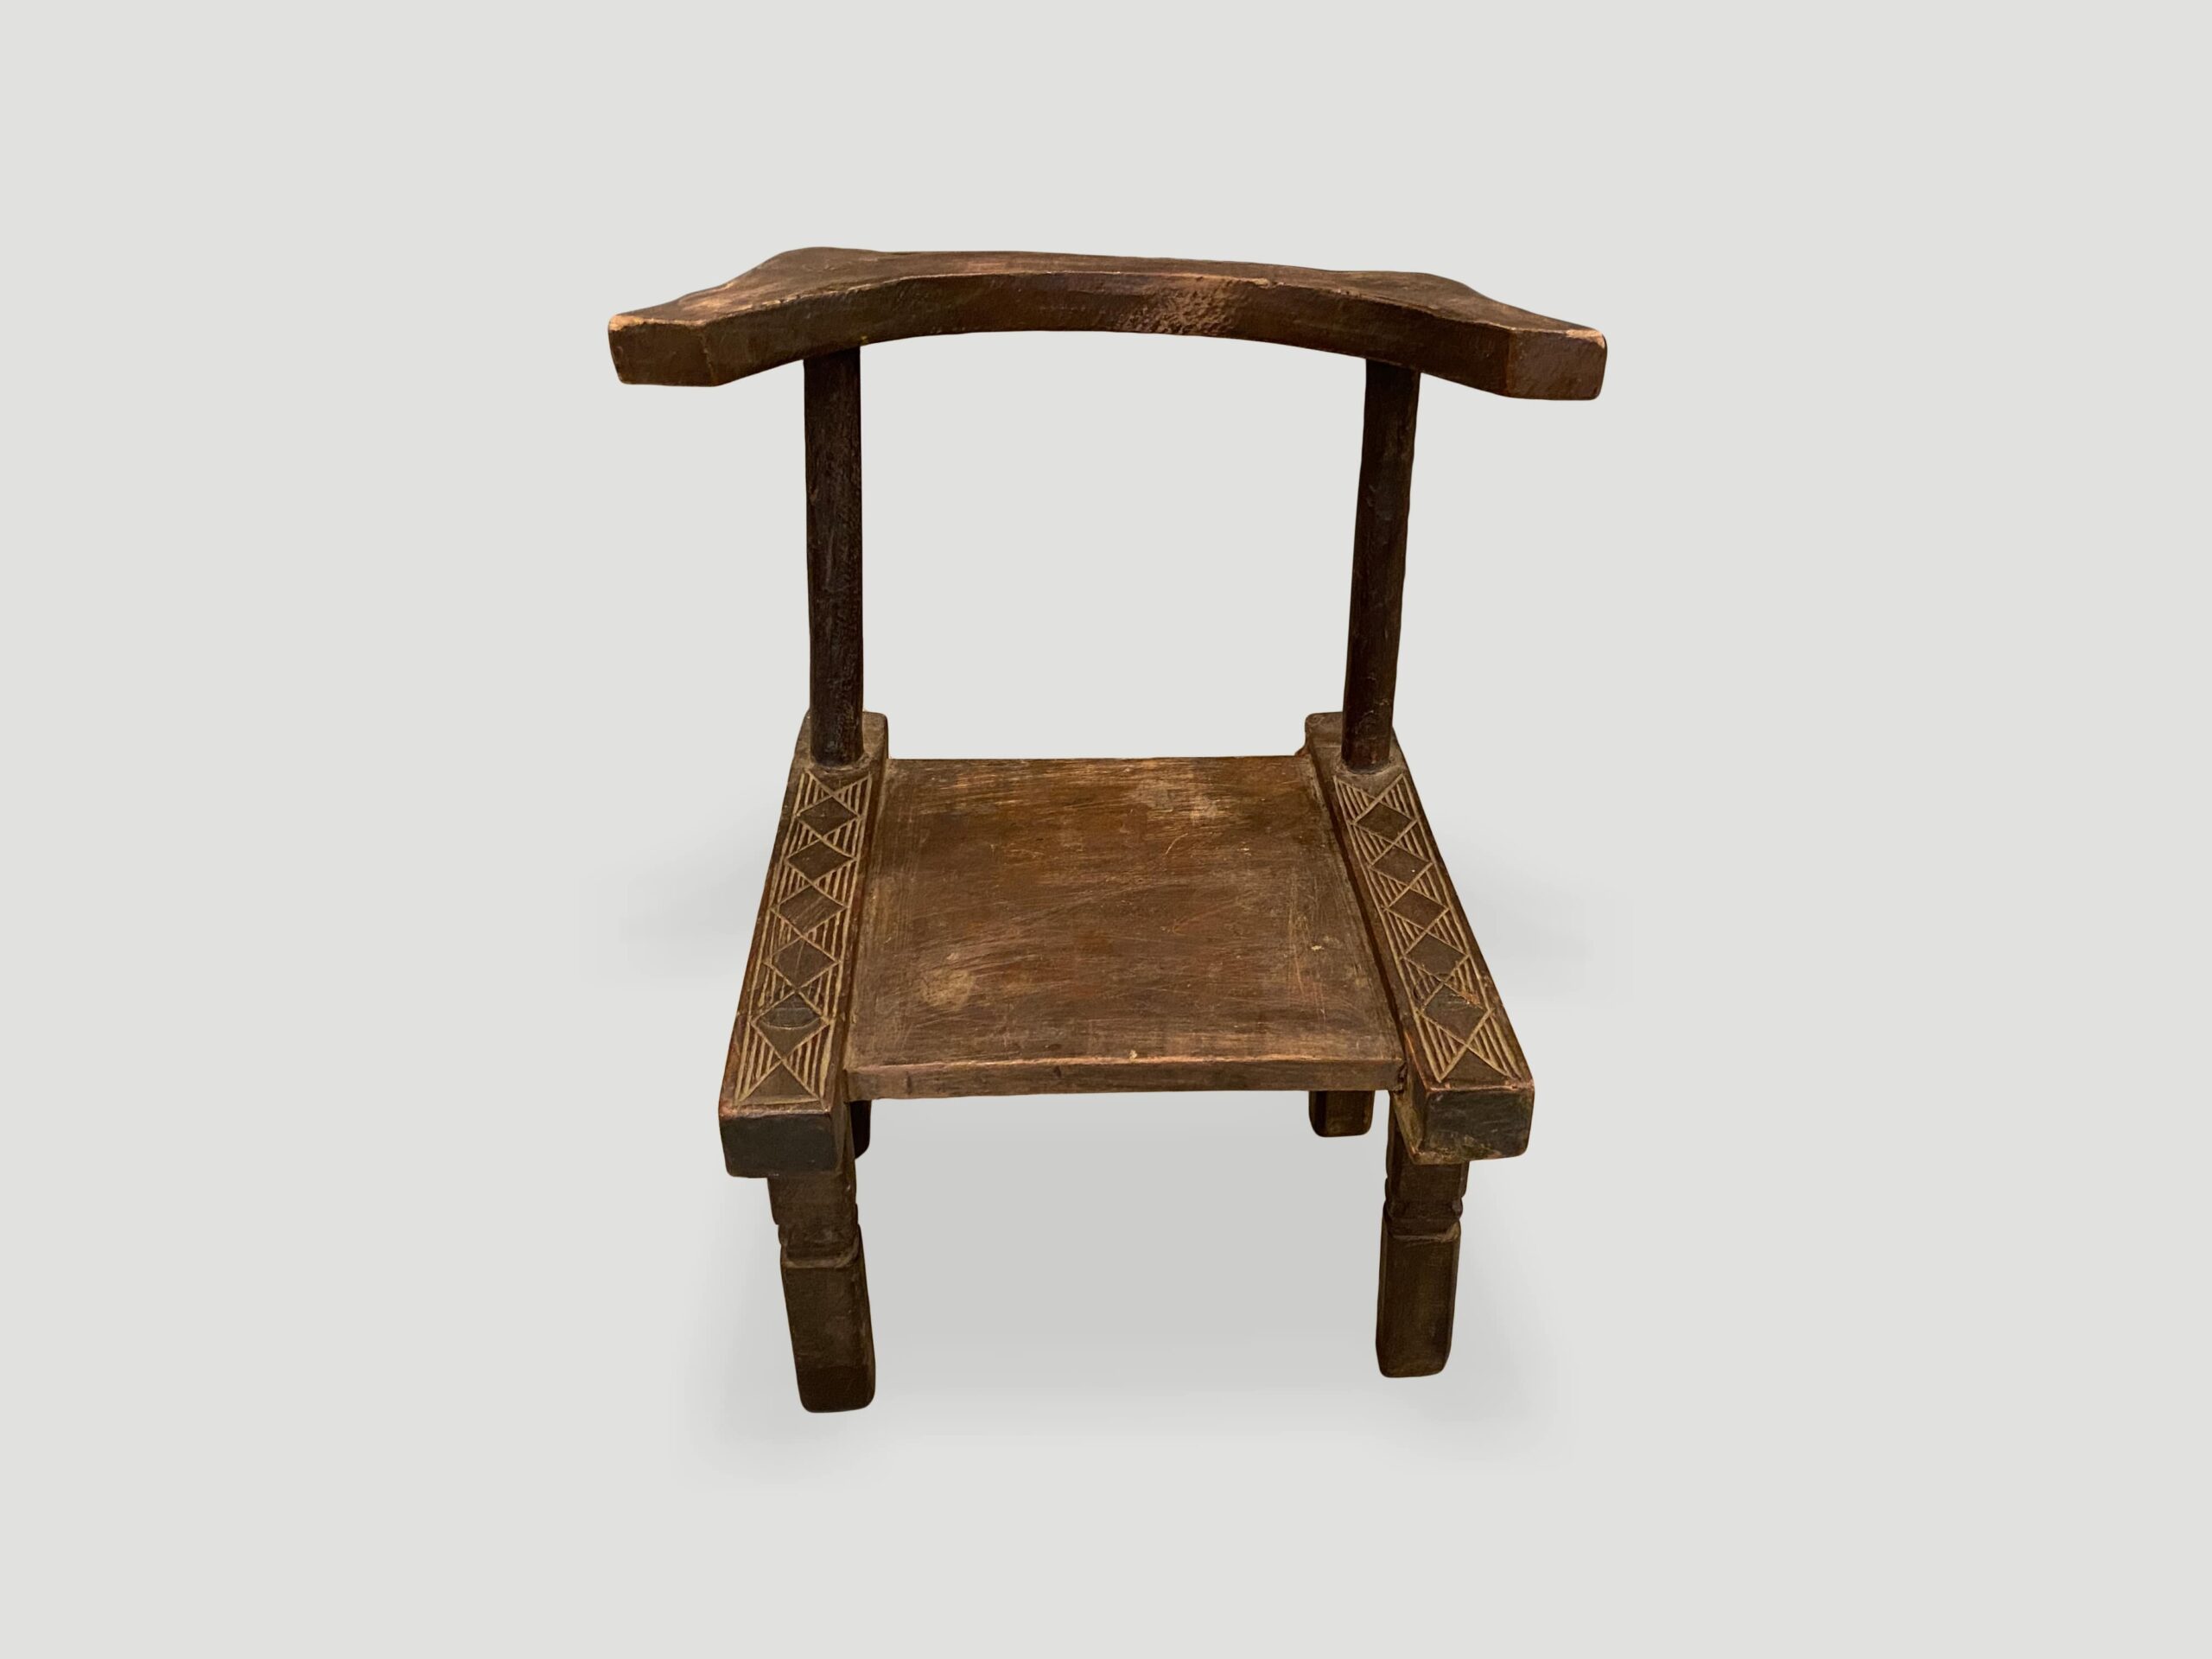 Hand carved wooden chair from the Ivory Coast of Africa